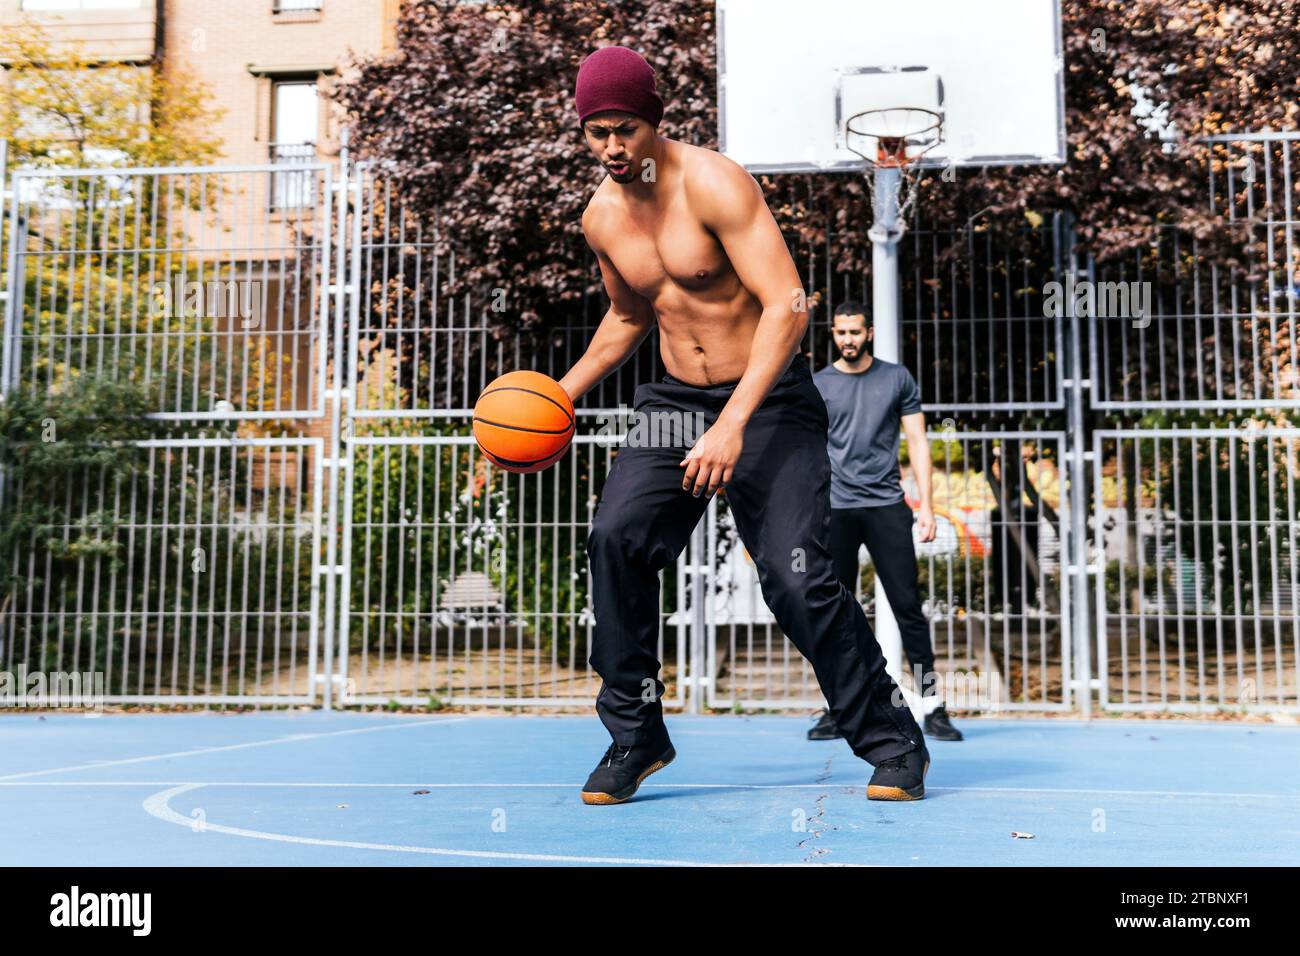 man in defense playing basketball with his friend Stock Photo